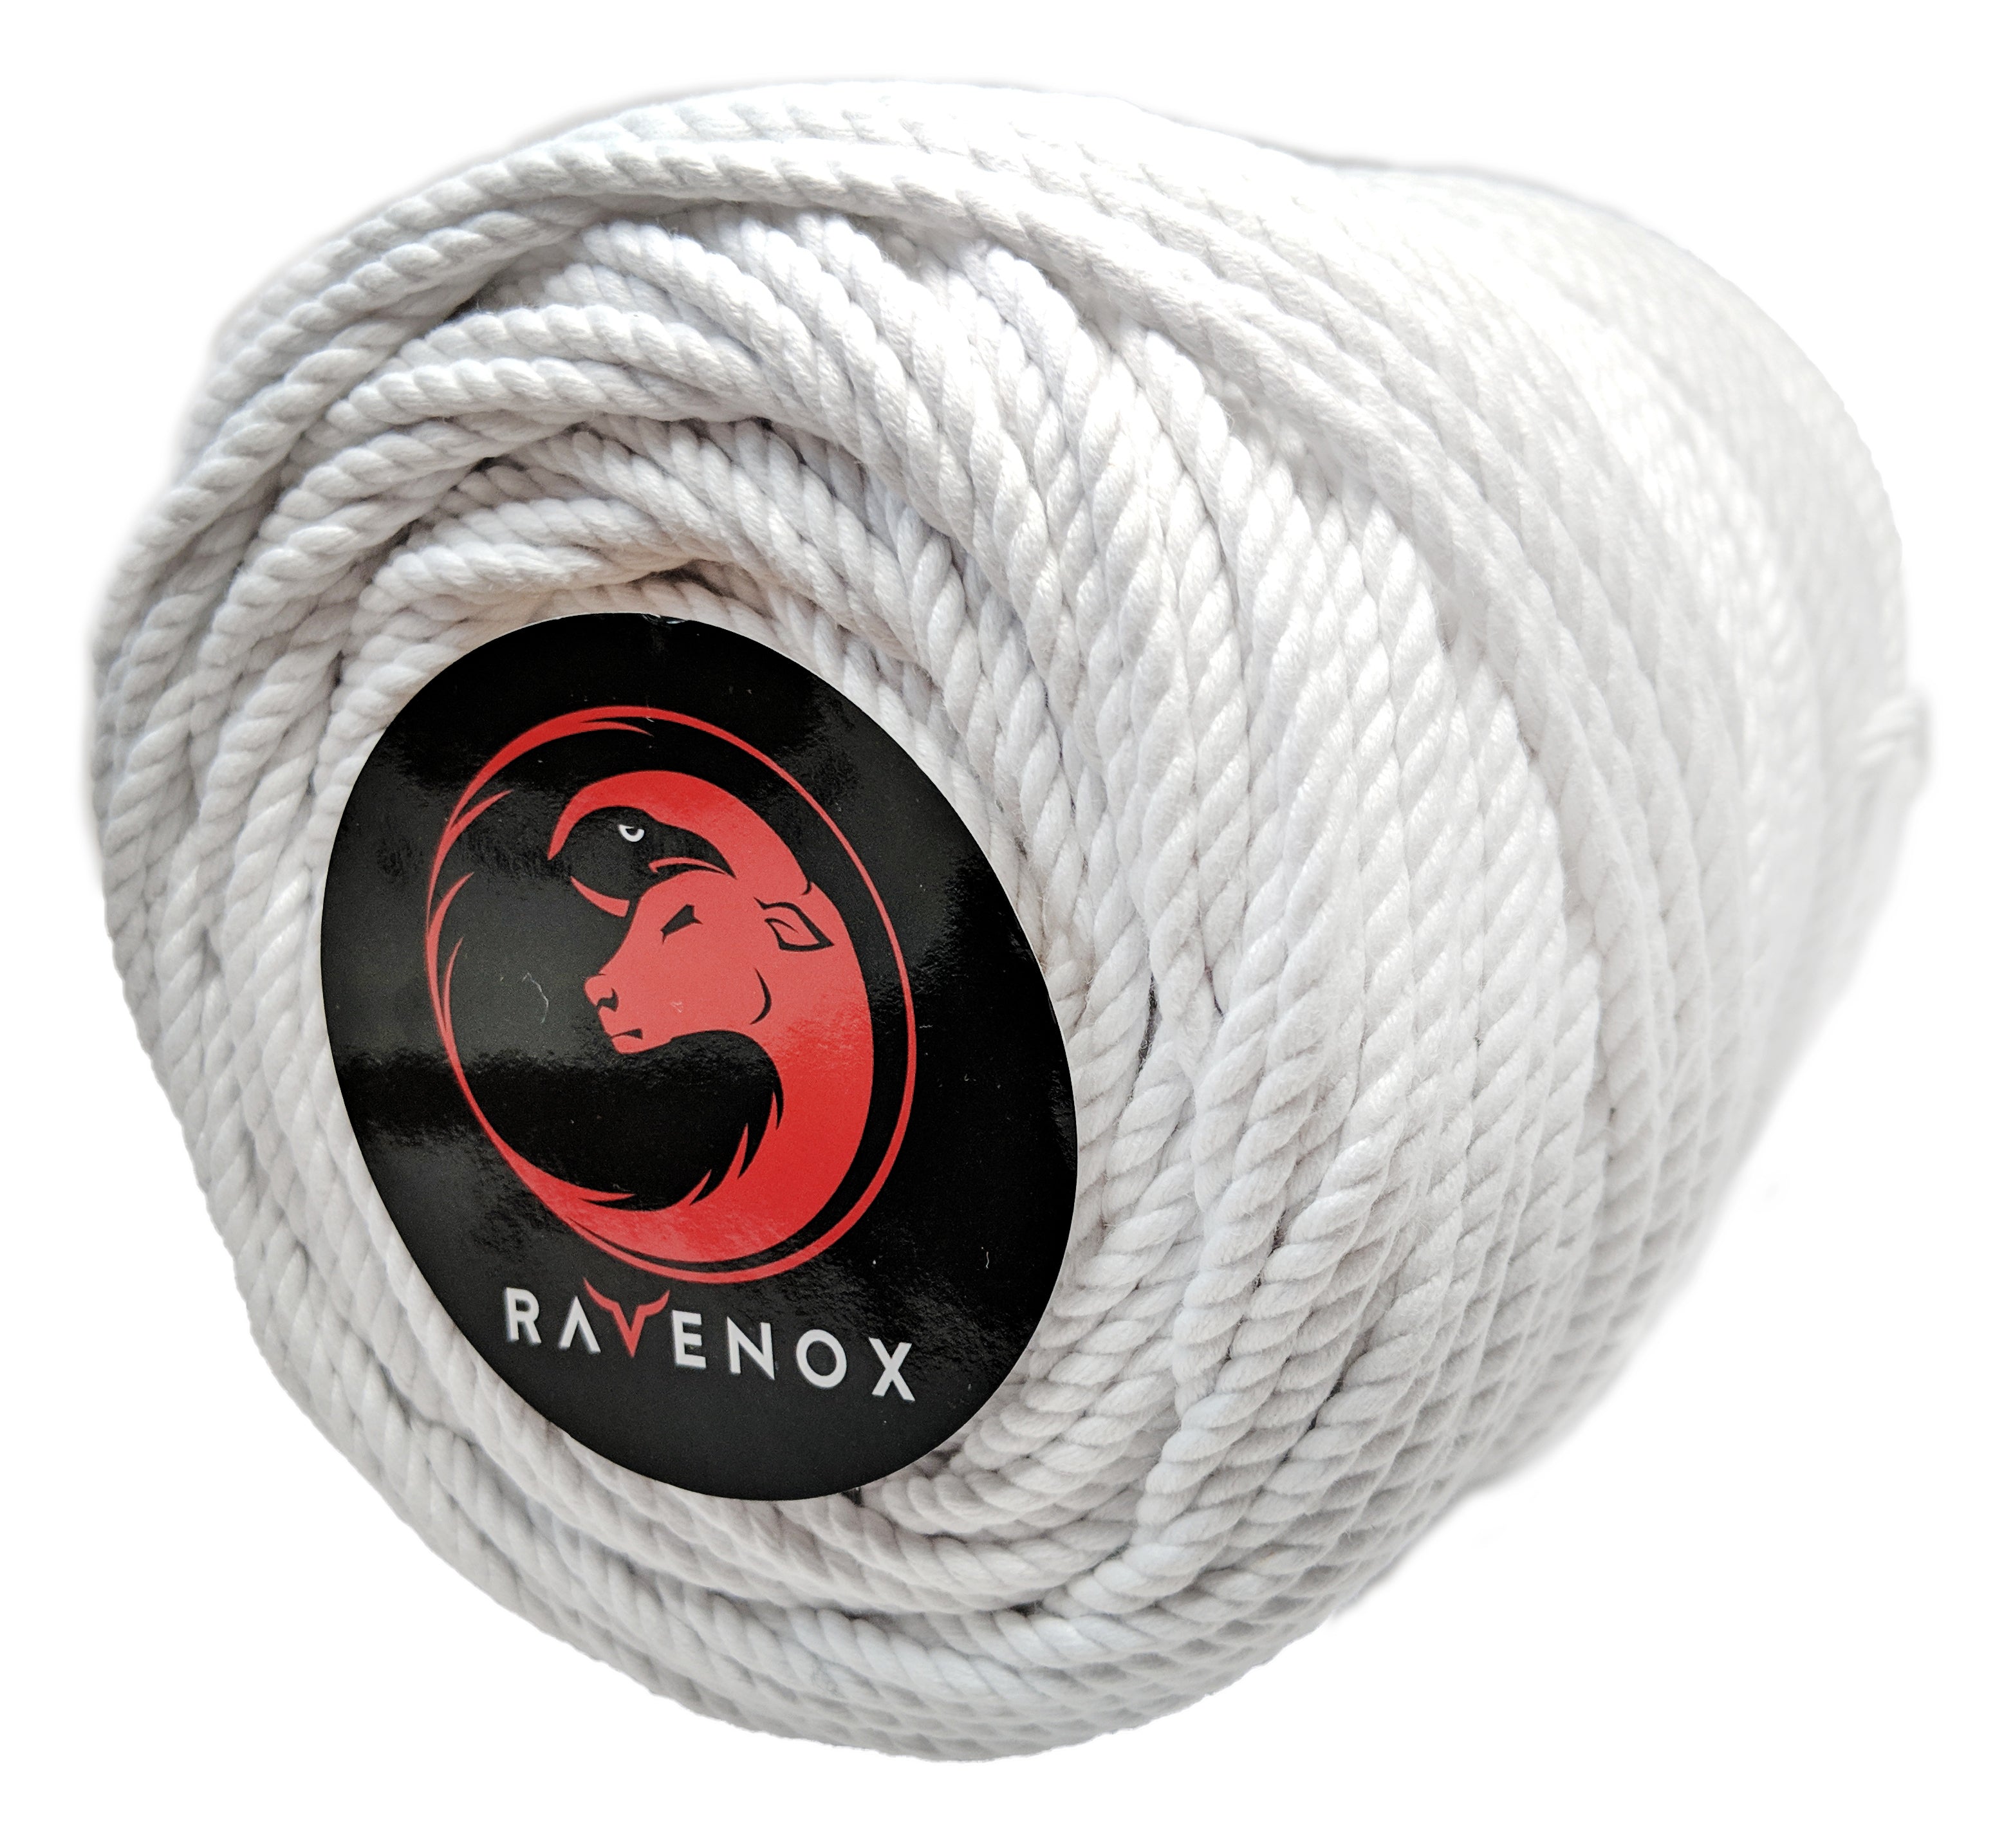 2mm White Cotton String for Crafts, Gift Wrapping, Macrame (200 Yards)